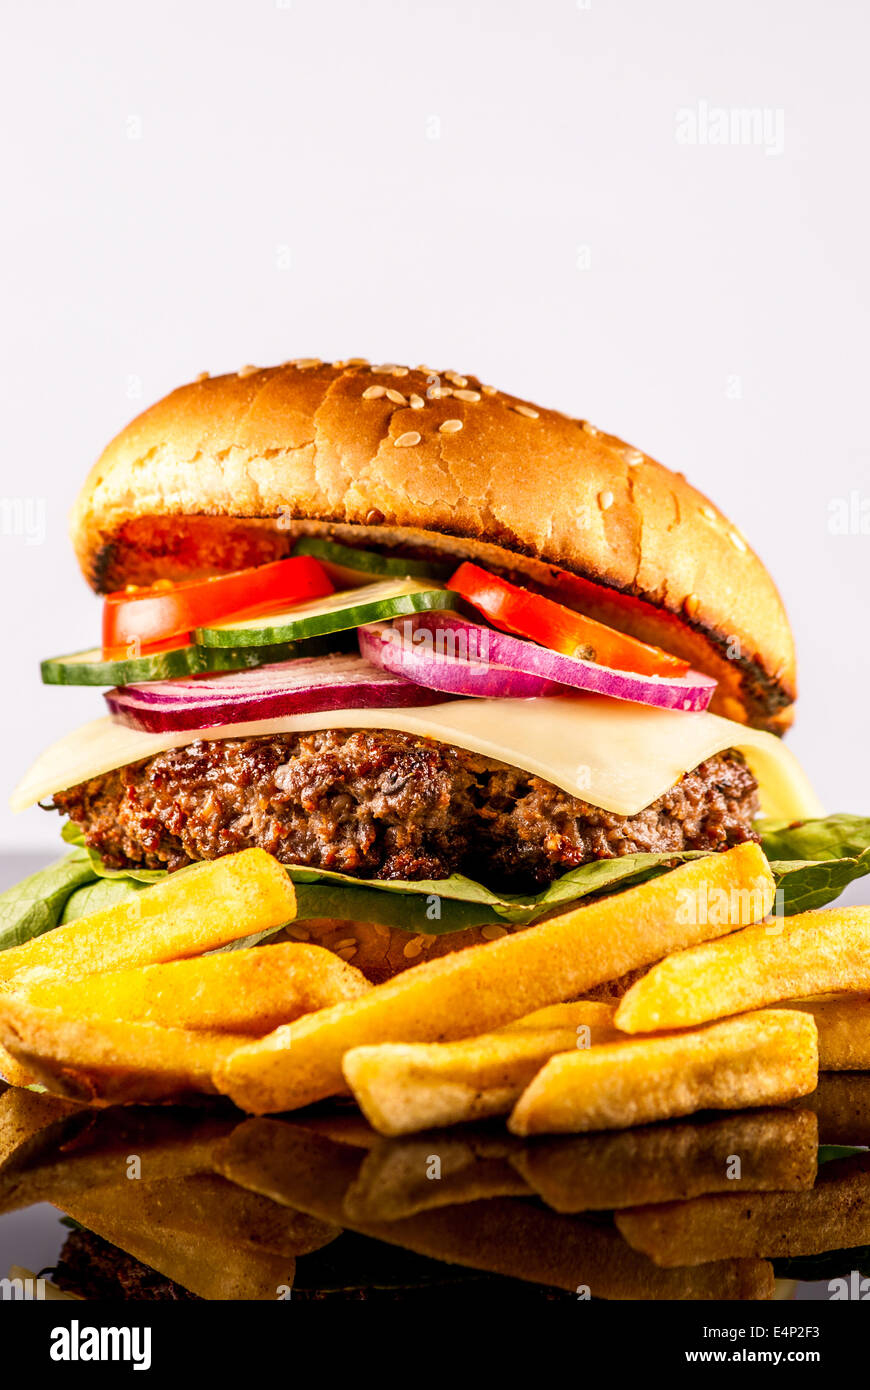 Fresh hamburger with vegetables and fries on reflect background Stock Photo